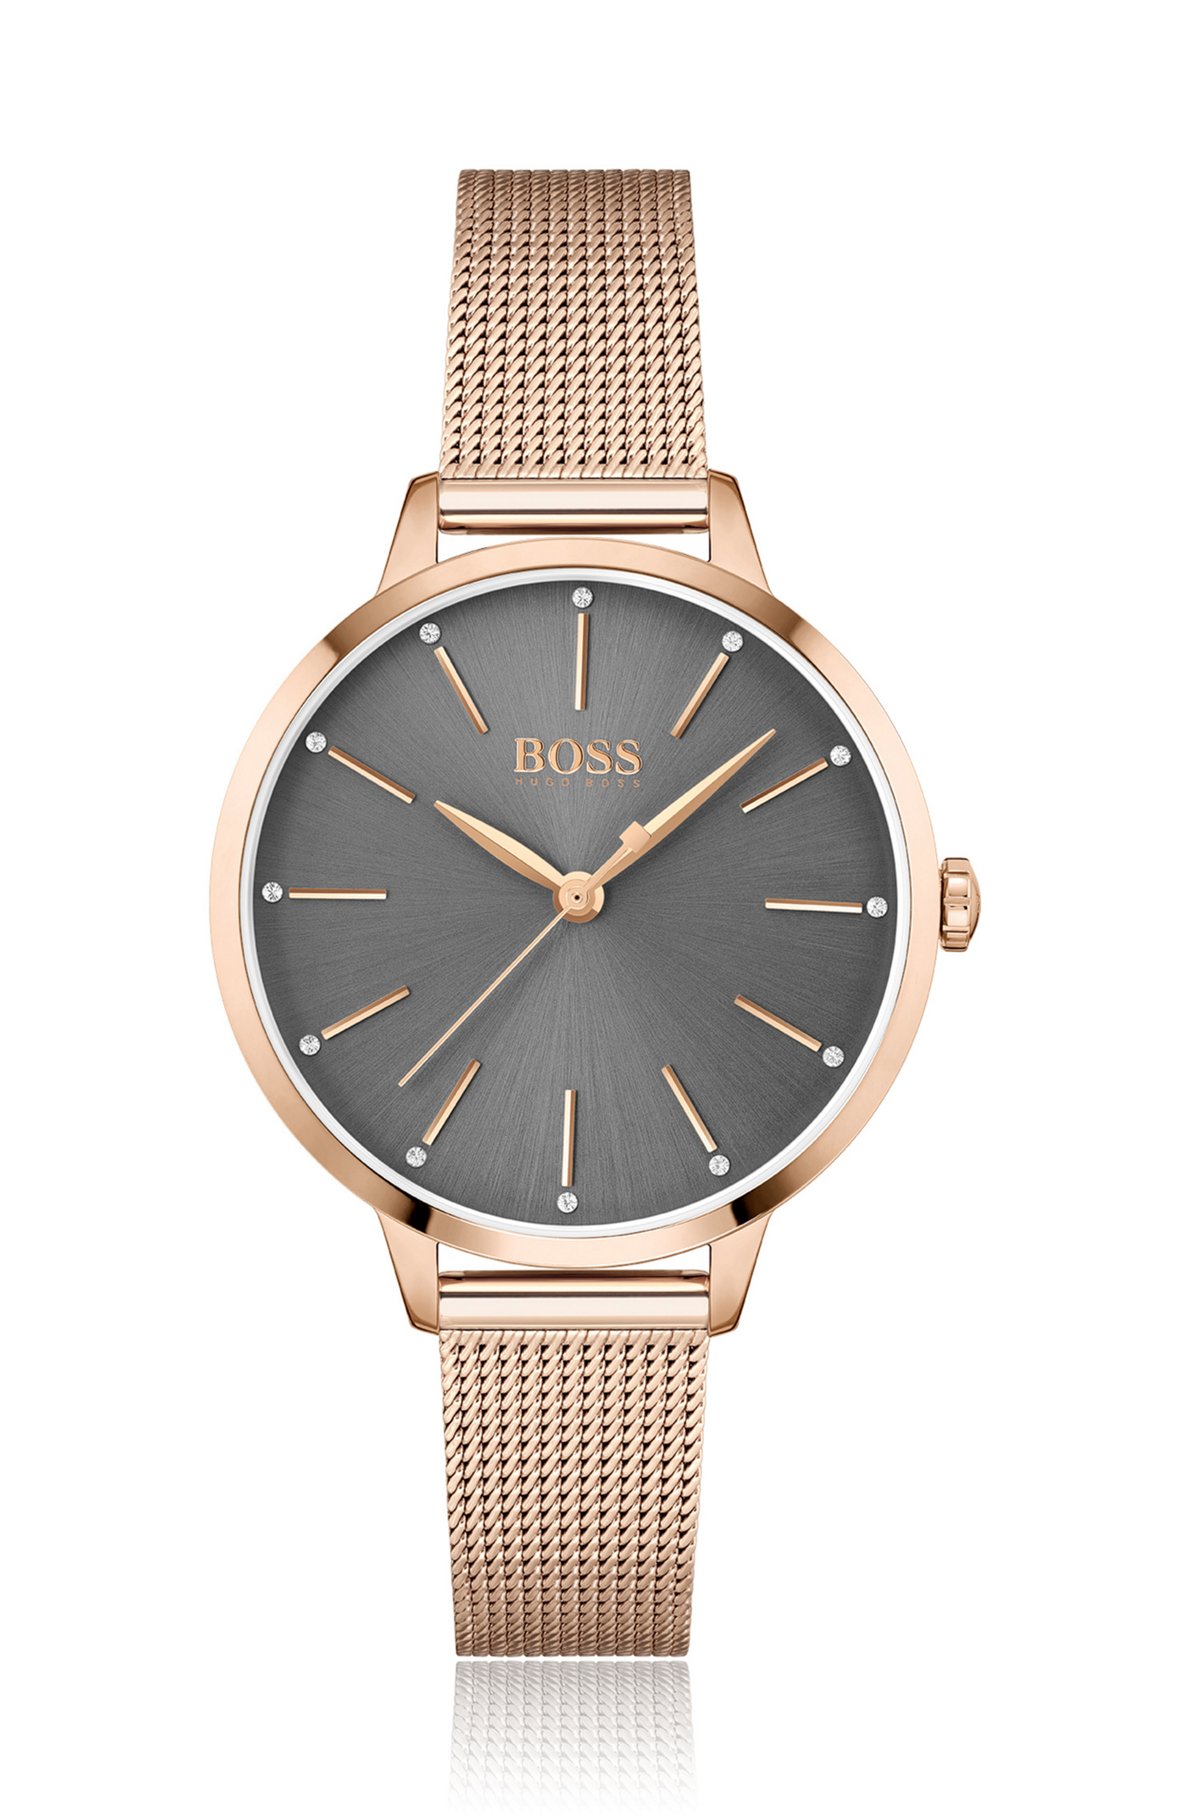 - Carnation-gold-effect crystal-studded watch with mesh bracelet